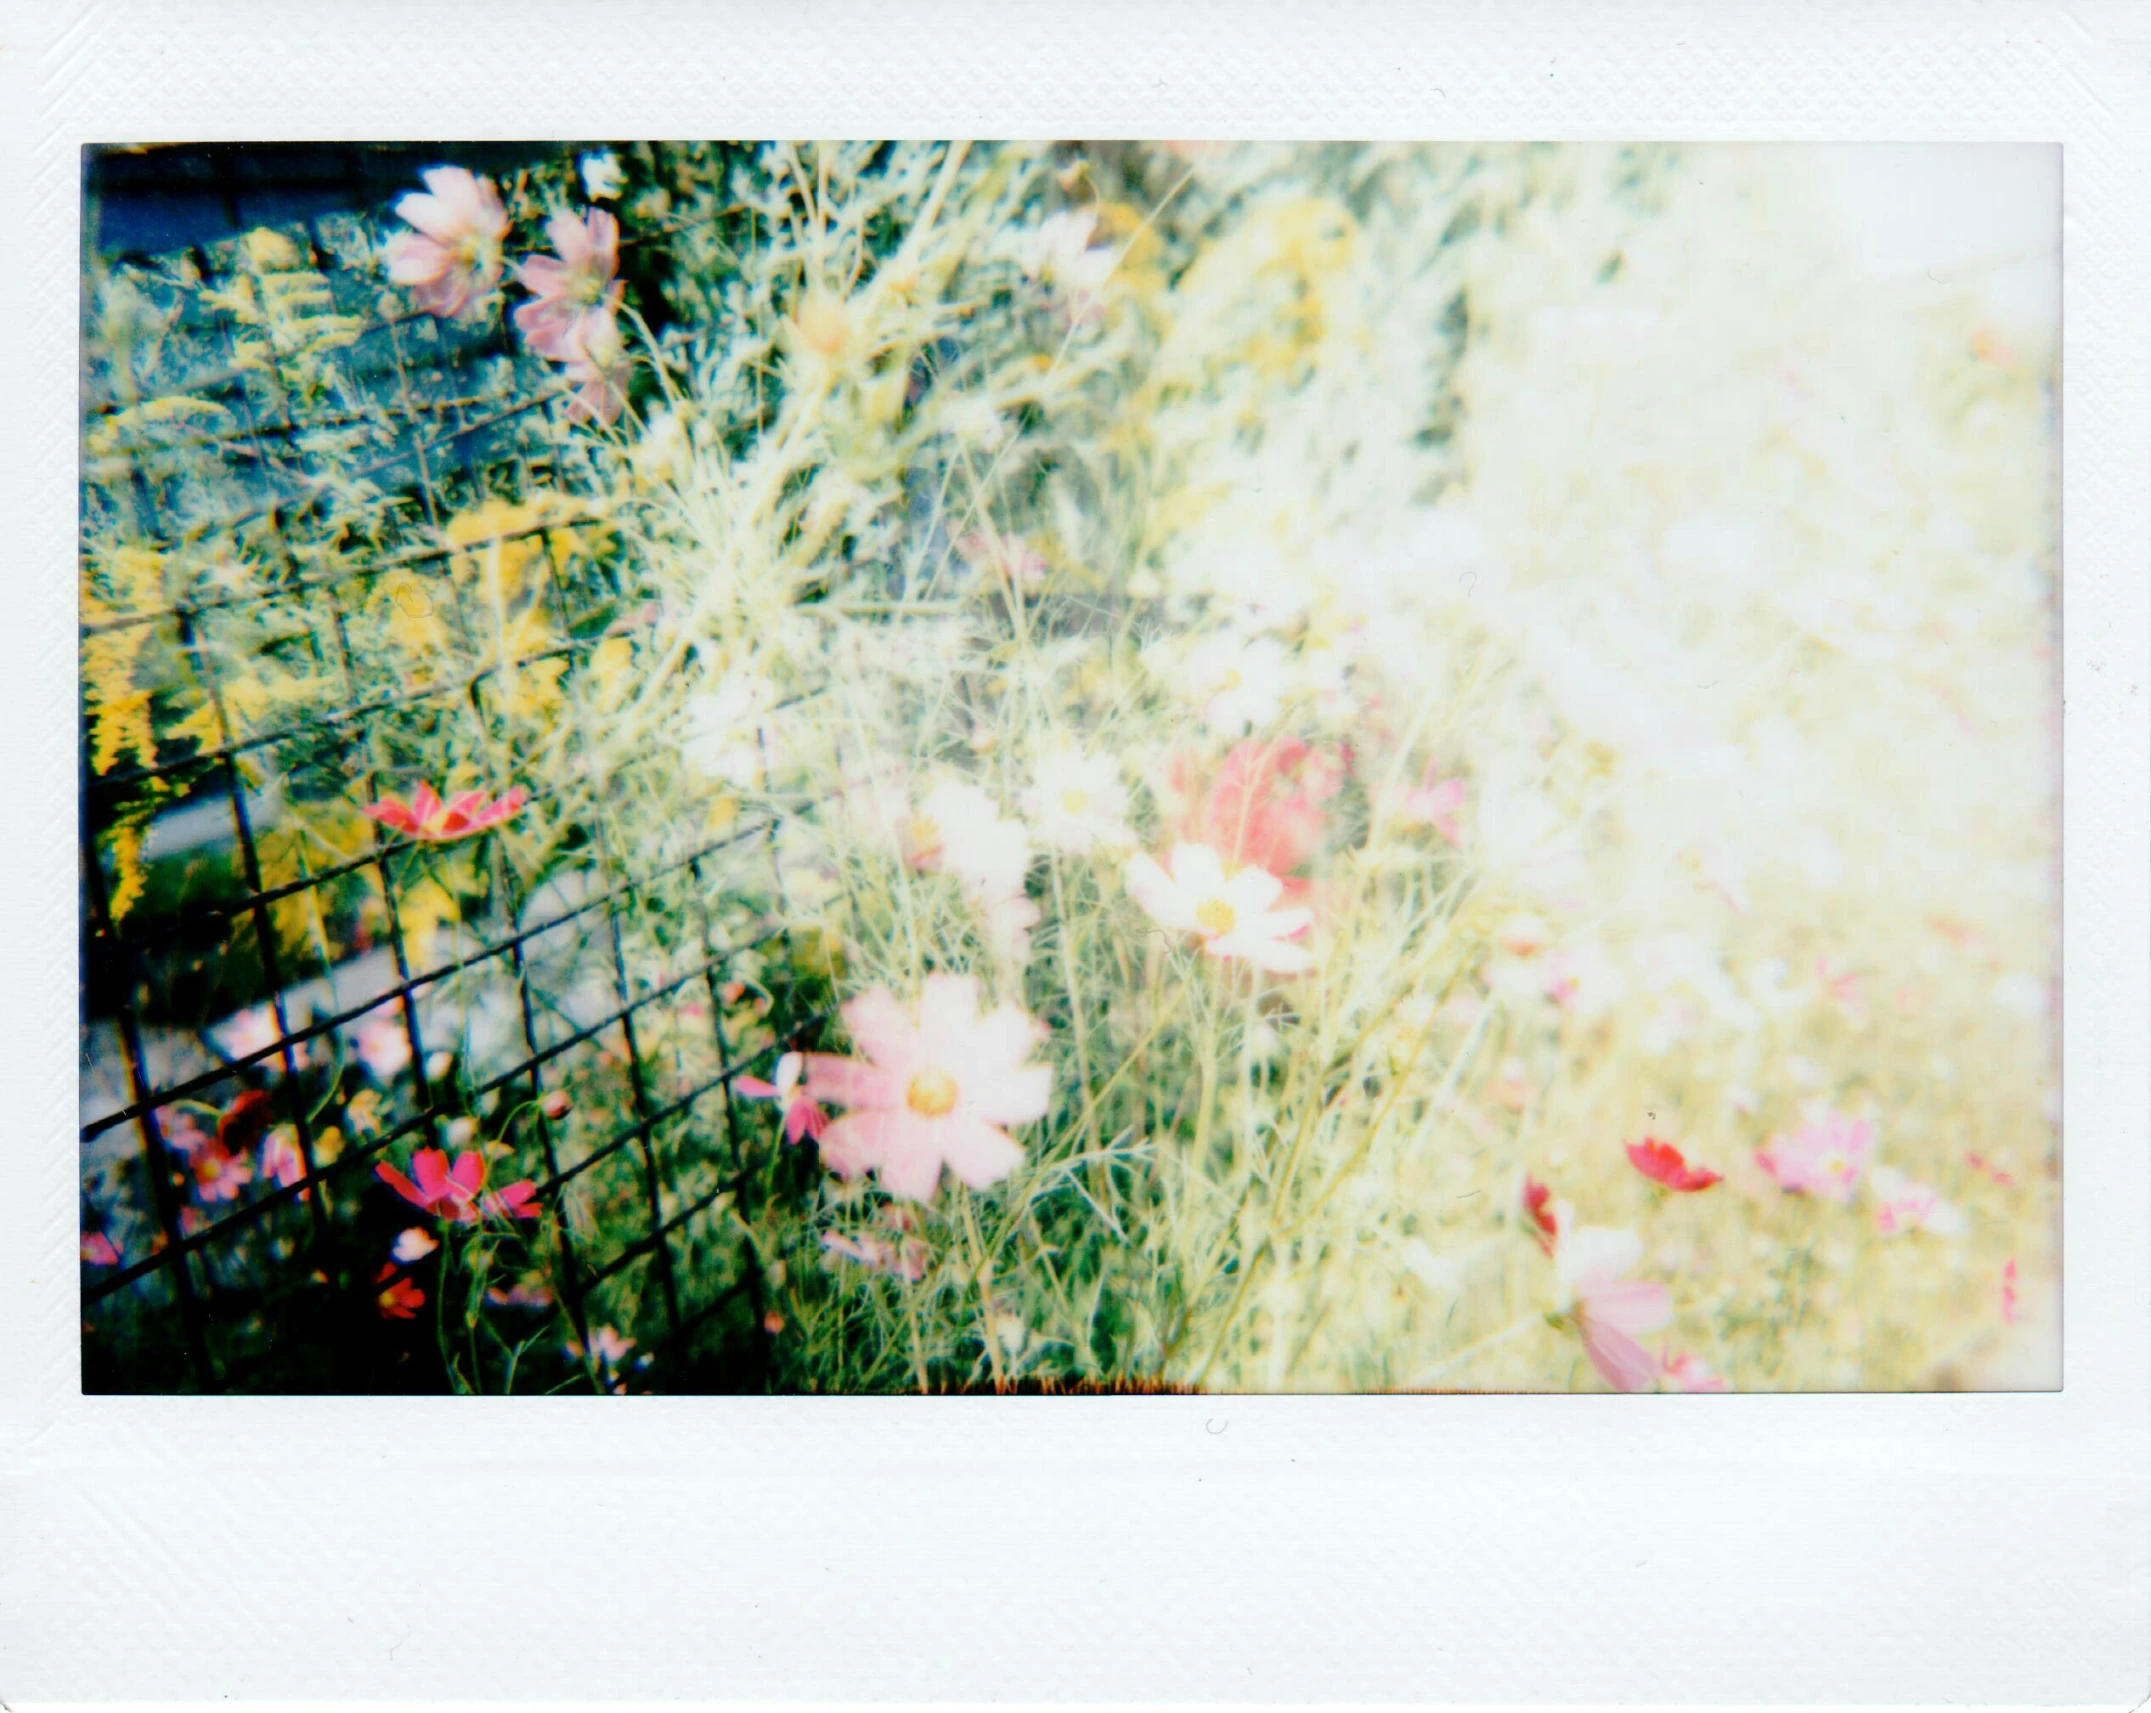 a polaroid picture of a field of flowers, by Nathalie Rattner, in the garden, lo - fi colors, polaroid clear, cosmos